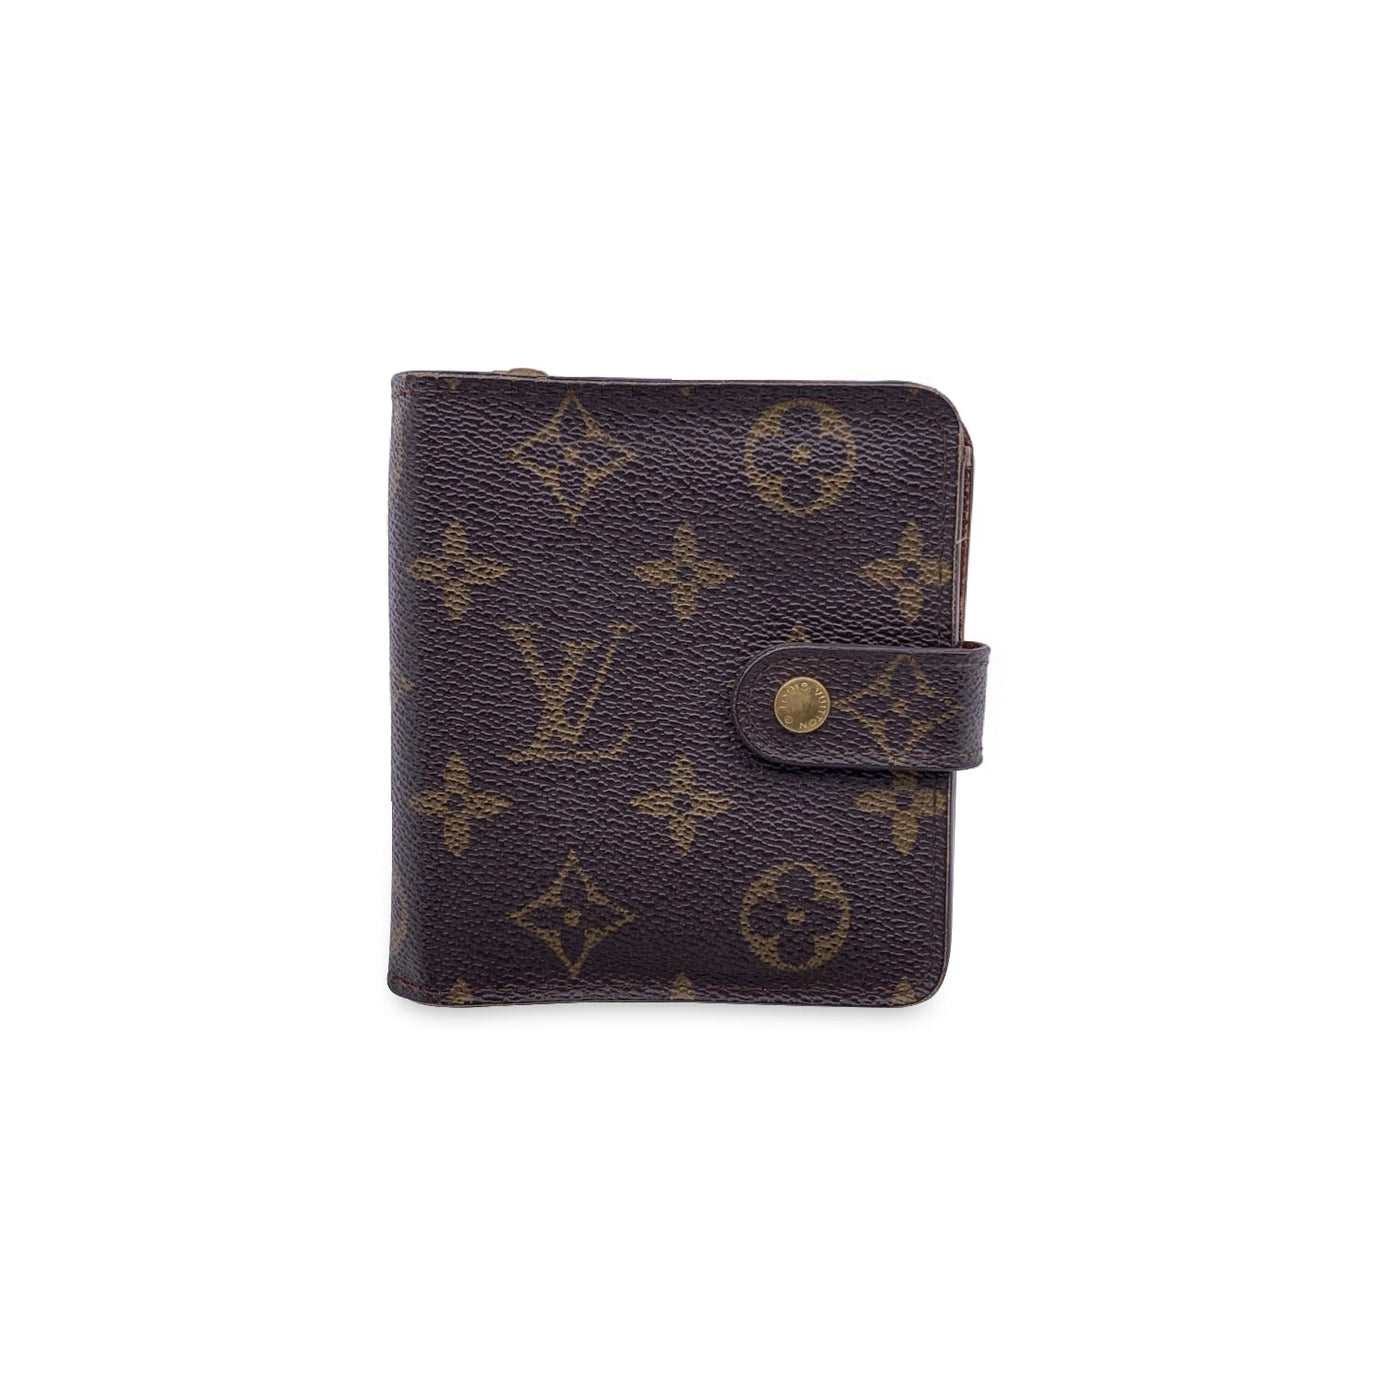 Capucines Compact Wallet Taurillon Leather  Women  Small Leather Goods  LOUIS  VUITTON 